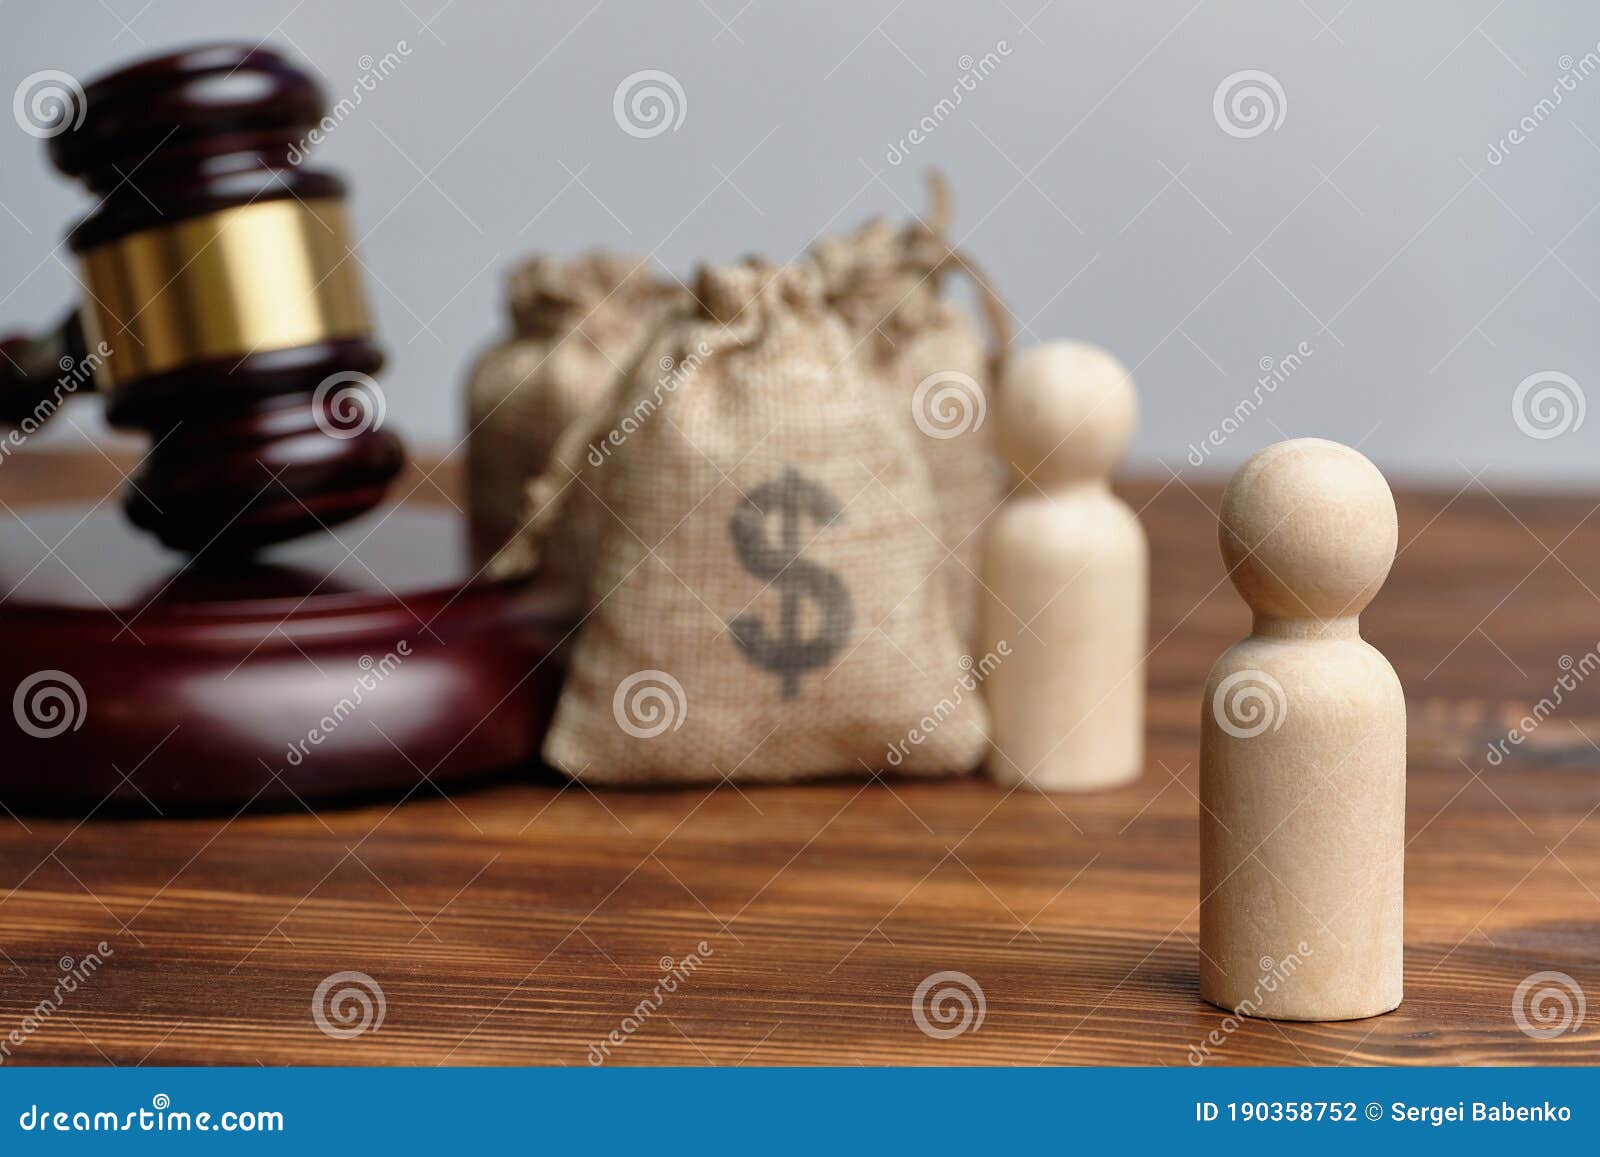 A Court Session between Businessmen. Abstract Bags of Money and Figures of  People Next To the Judge Hammer Stock Photo - Image of guilt, next:  190358752